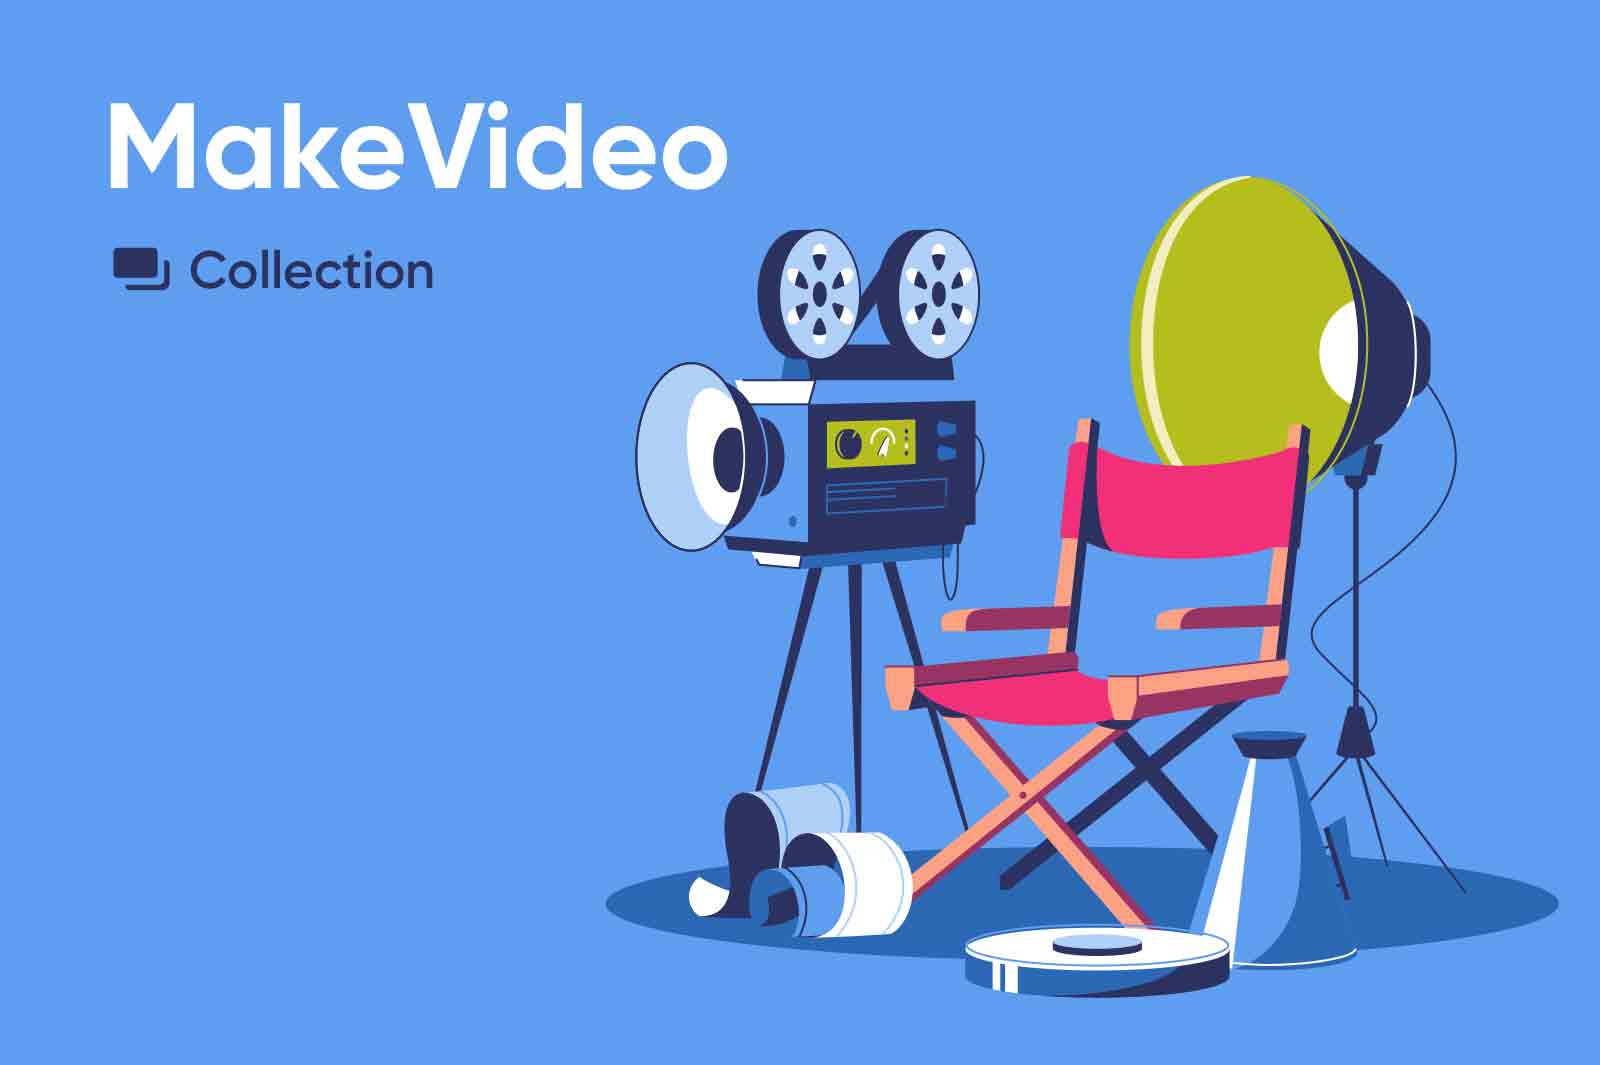 Series about making video in all forms and stages, video production for professionals and enthusiasts. Vector character illustrations.